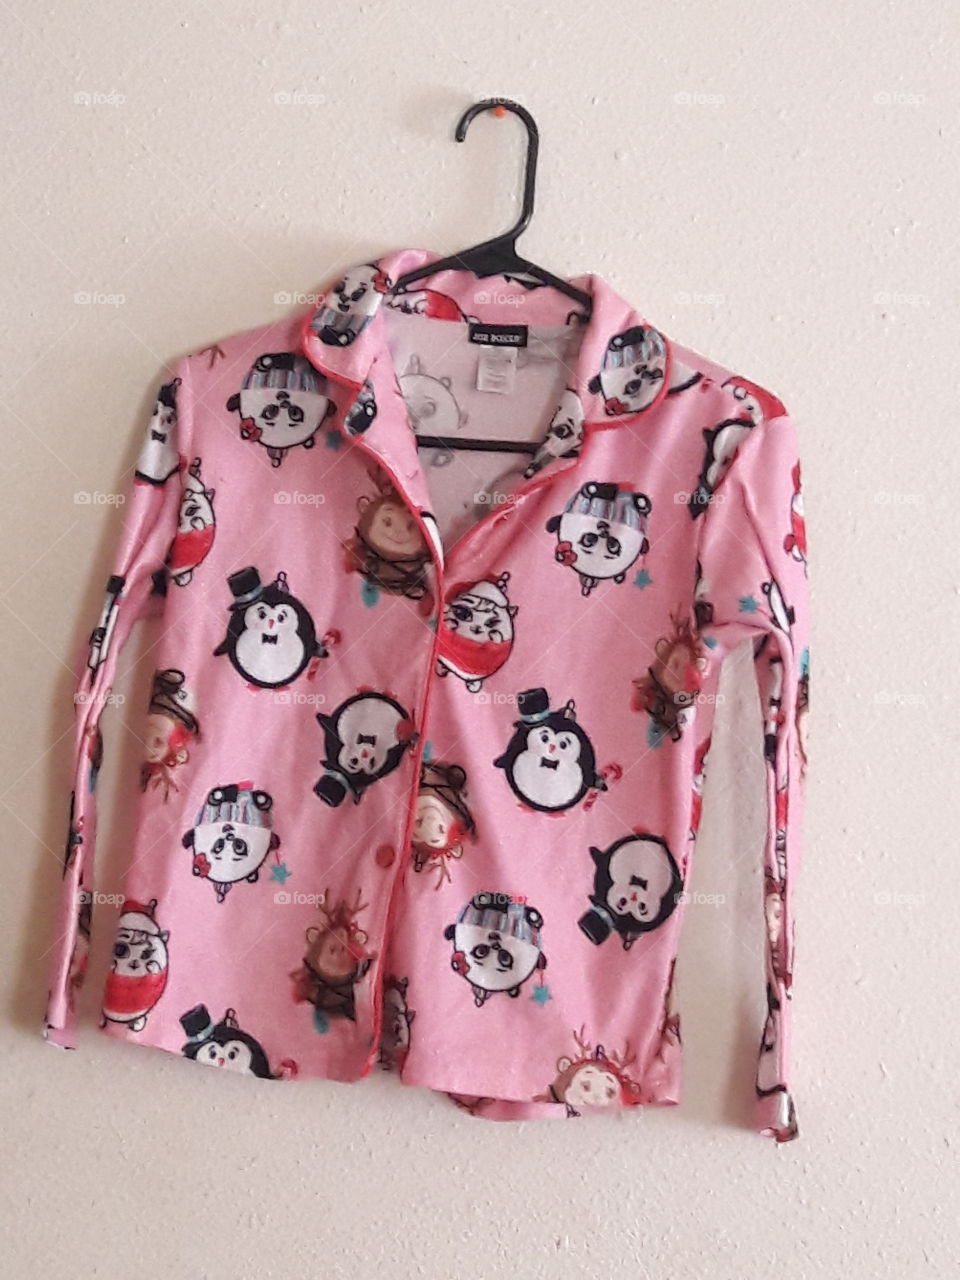 Girl's pink flannel pajama top with animal pattern hung up.